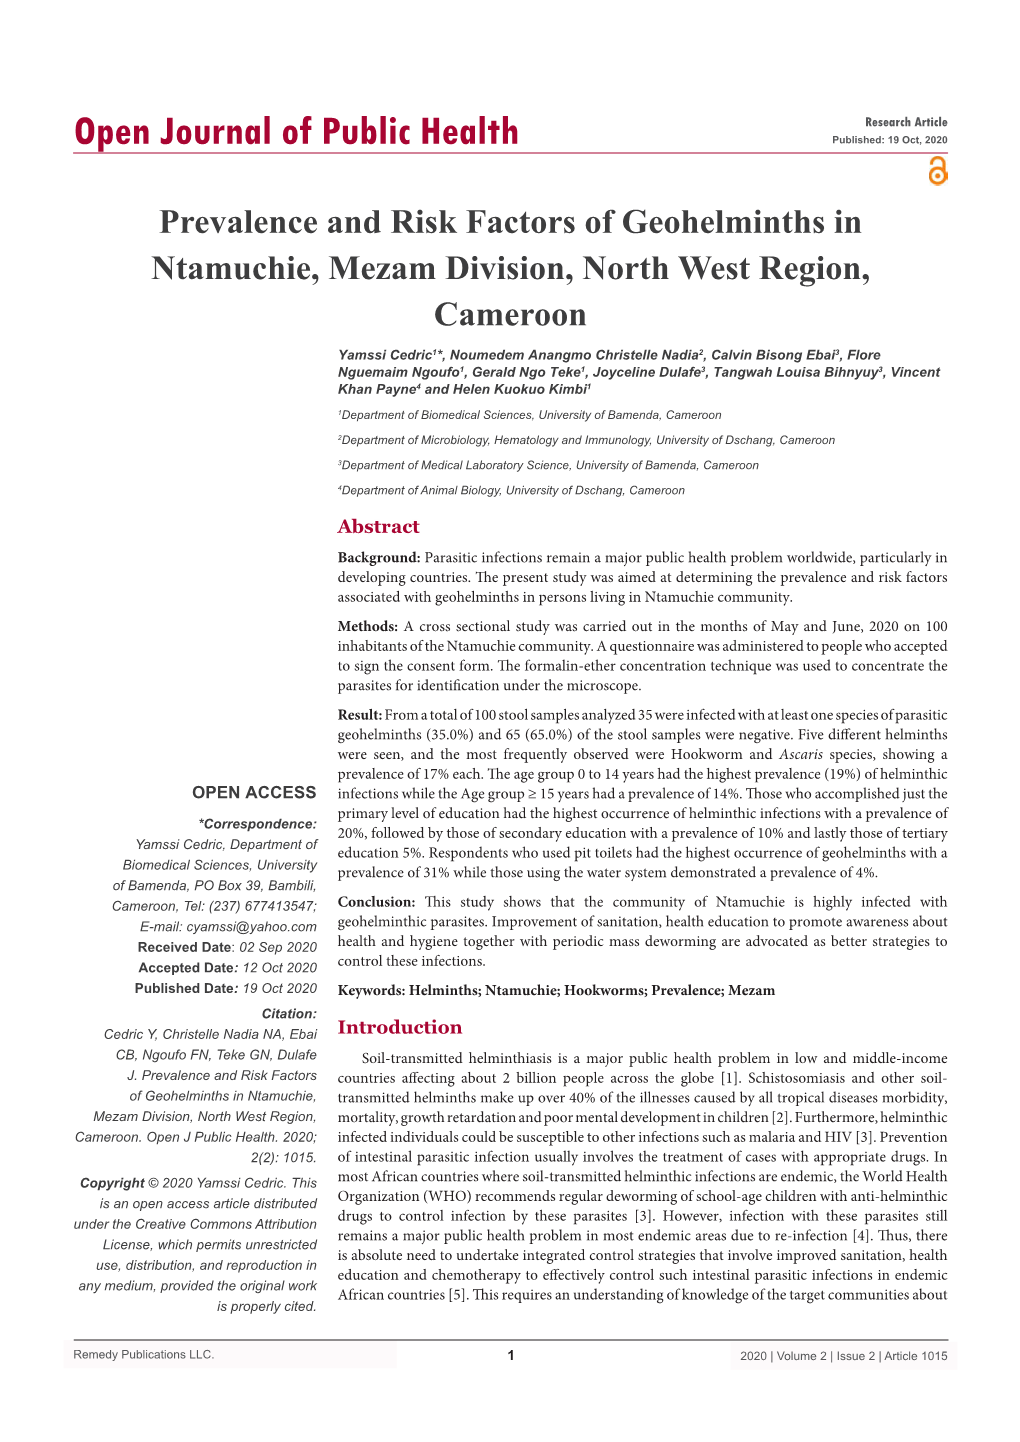 Prevalence and Risk Factors of Geohelminths in Ntamuchie, Mezam Division, North West Region, Cameroon